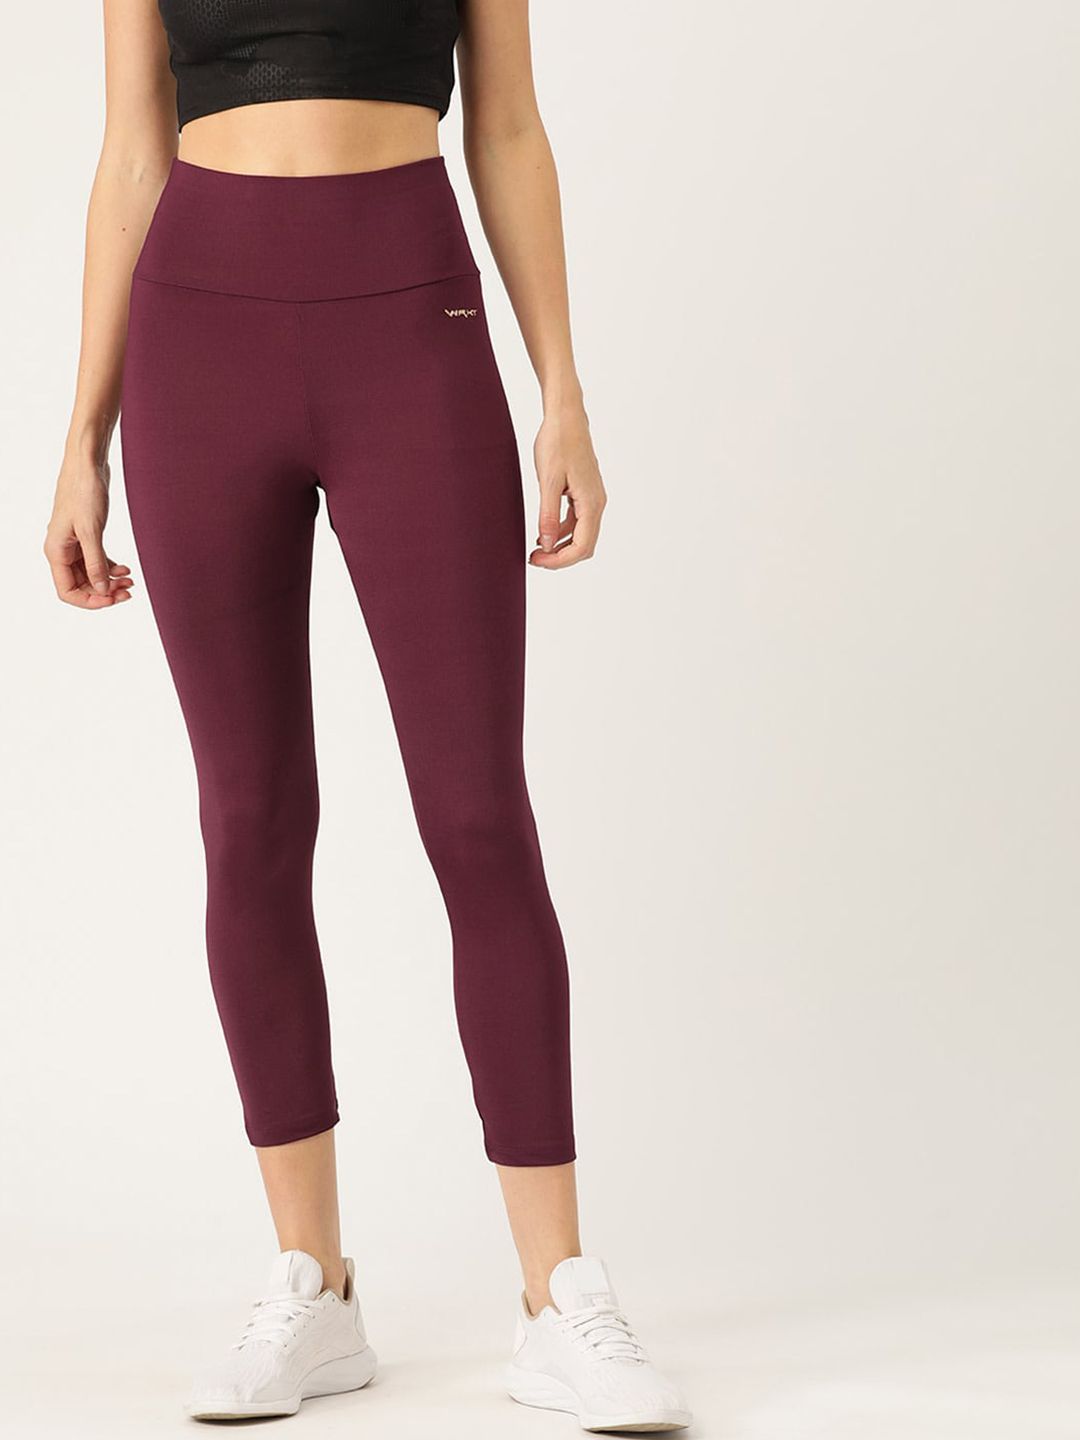 Sweet Dreams Women Maroon Solid Sports Tights Price in India